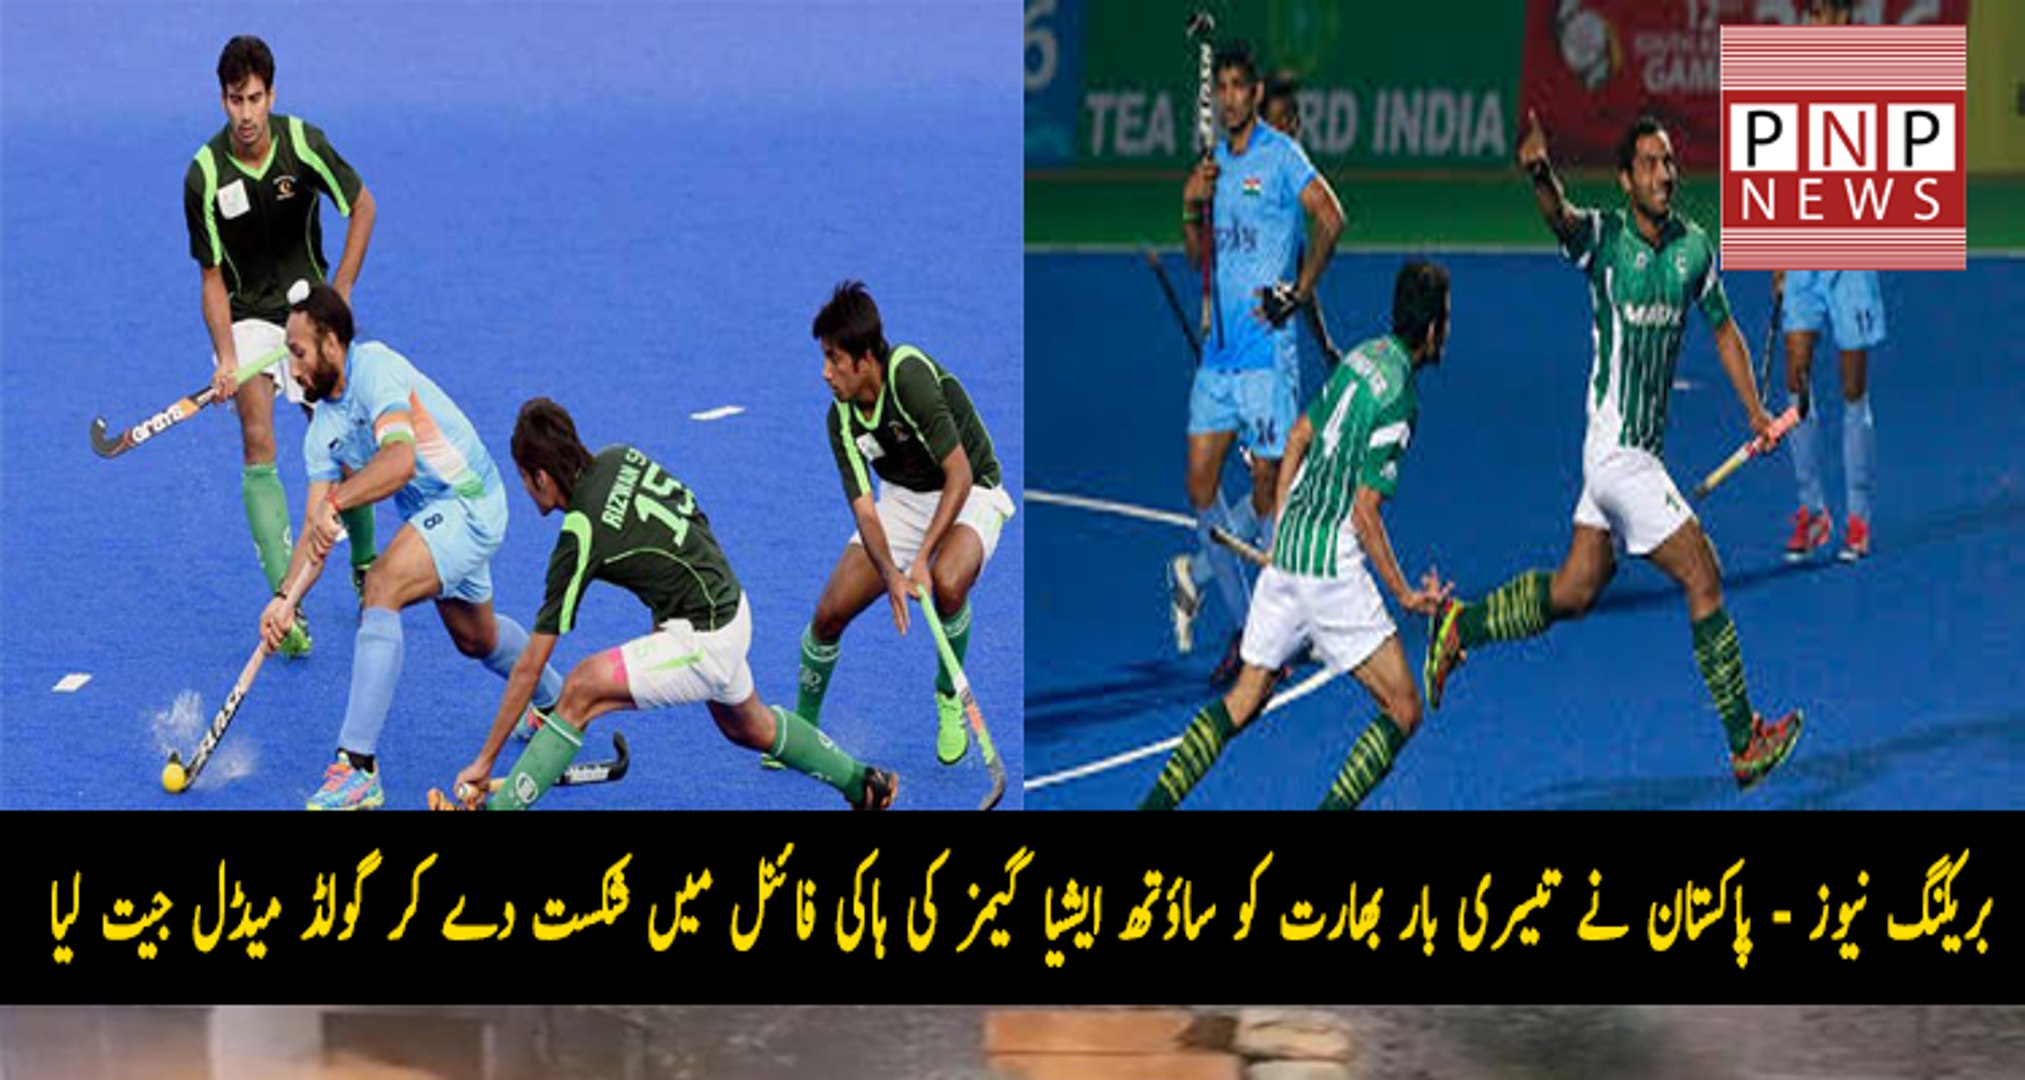 Pakistan Has Defeated India in South Asian Games hockey Final Match | PNPNews.net